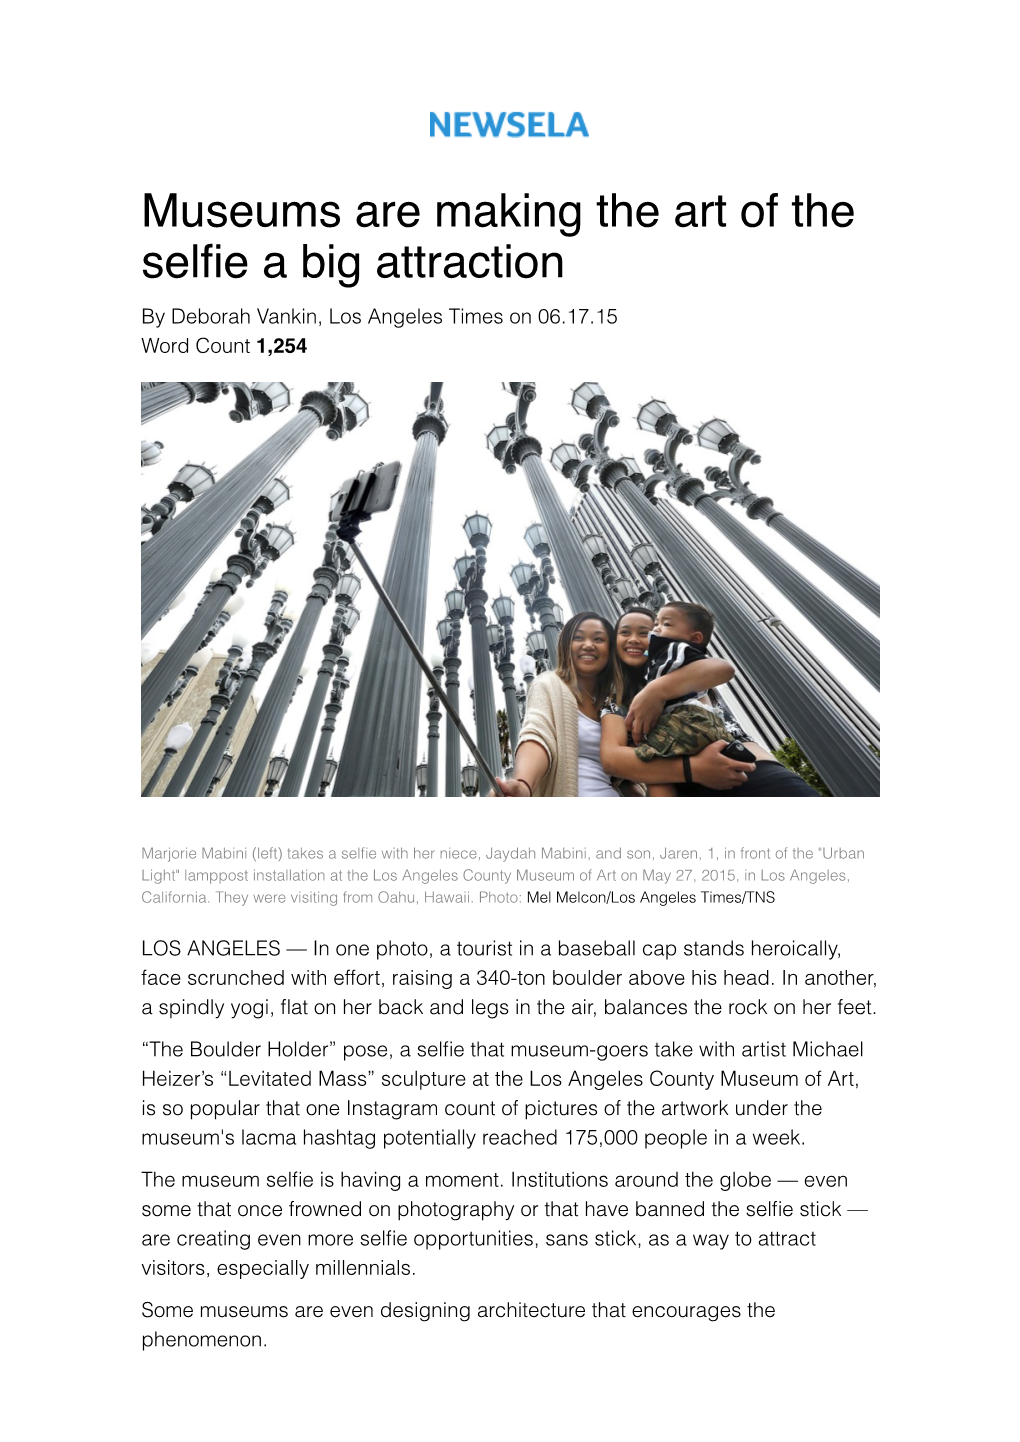 Museums Are Making the Art of the Selfie a Big Attraction by Deborah Vankin, Los Angeles Times on 06.17.15 Word Count 1,254